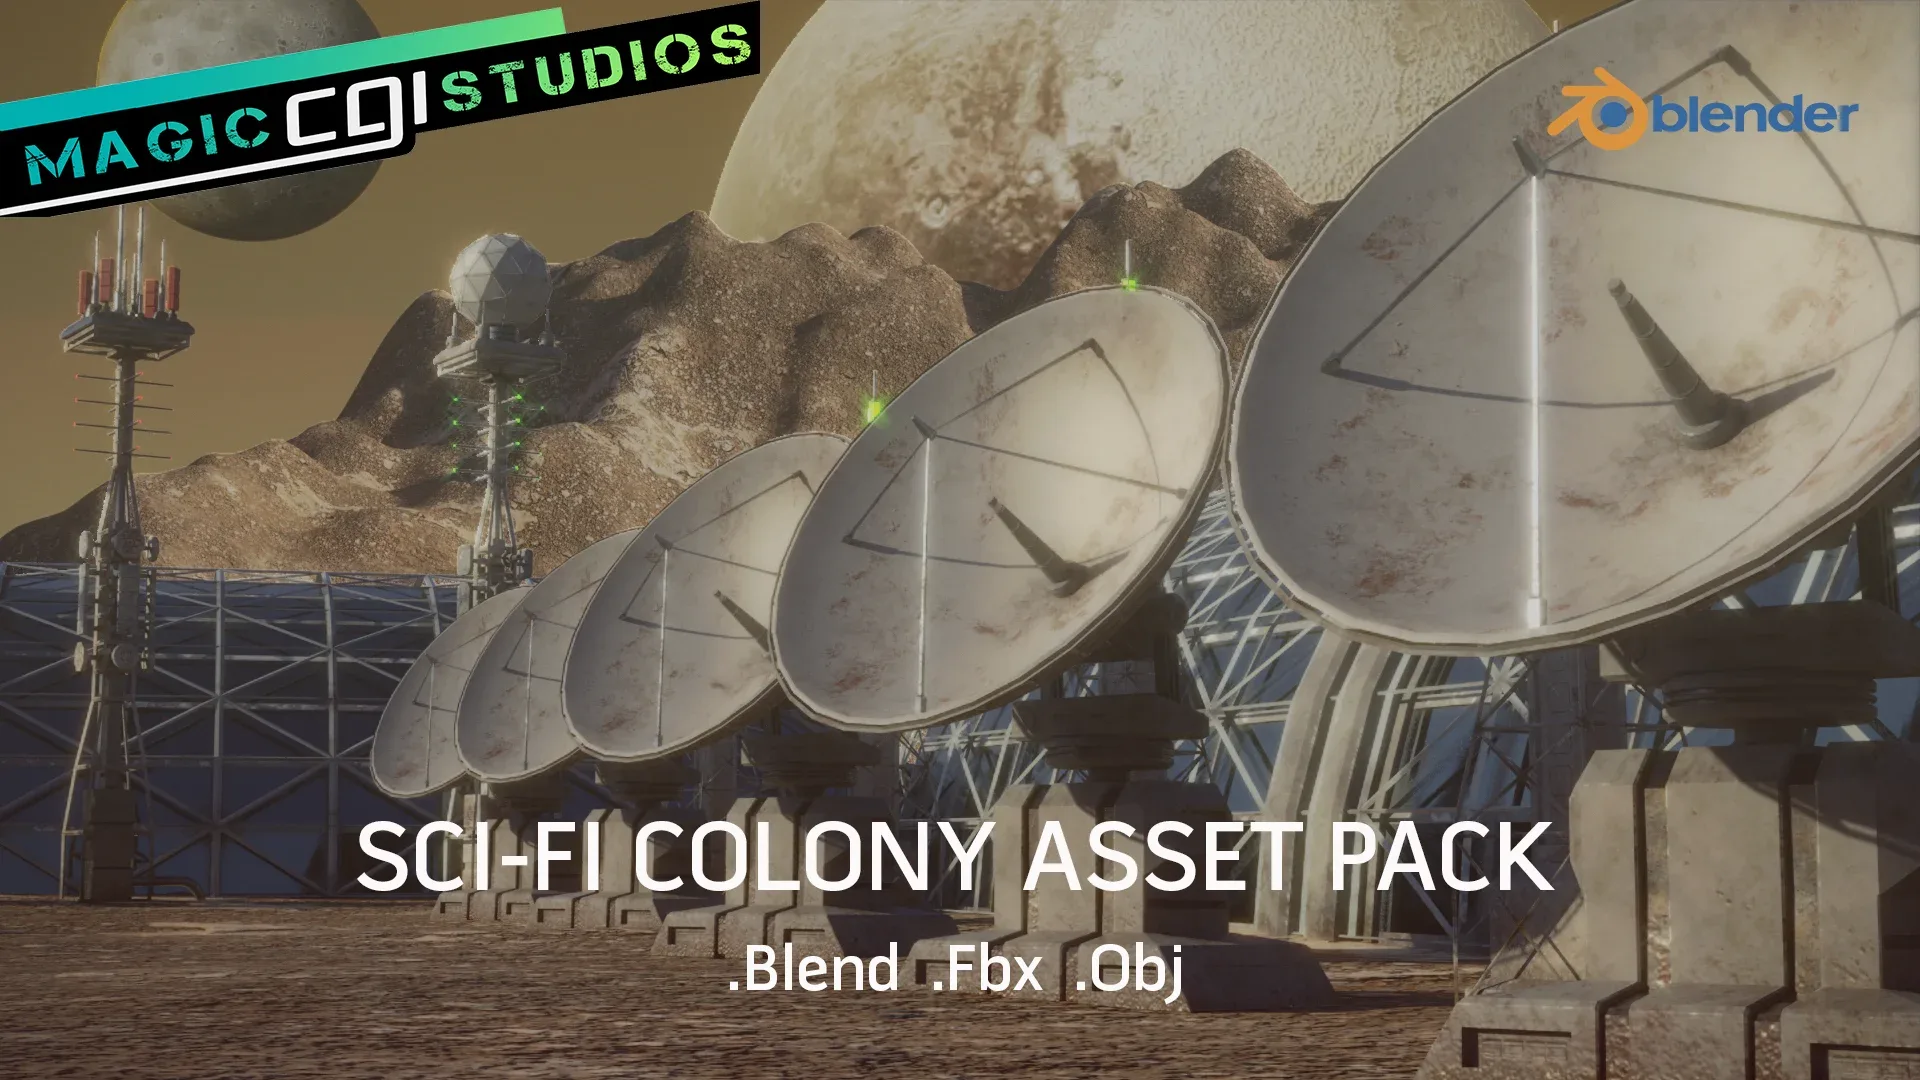 Sci-Fi colony Asset Pack